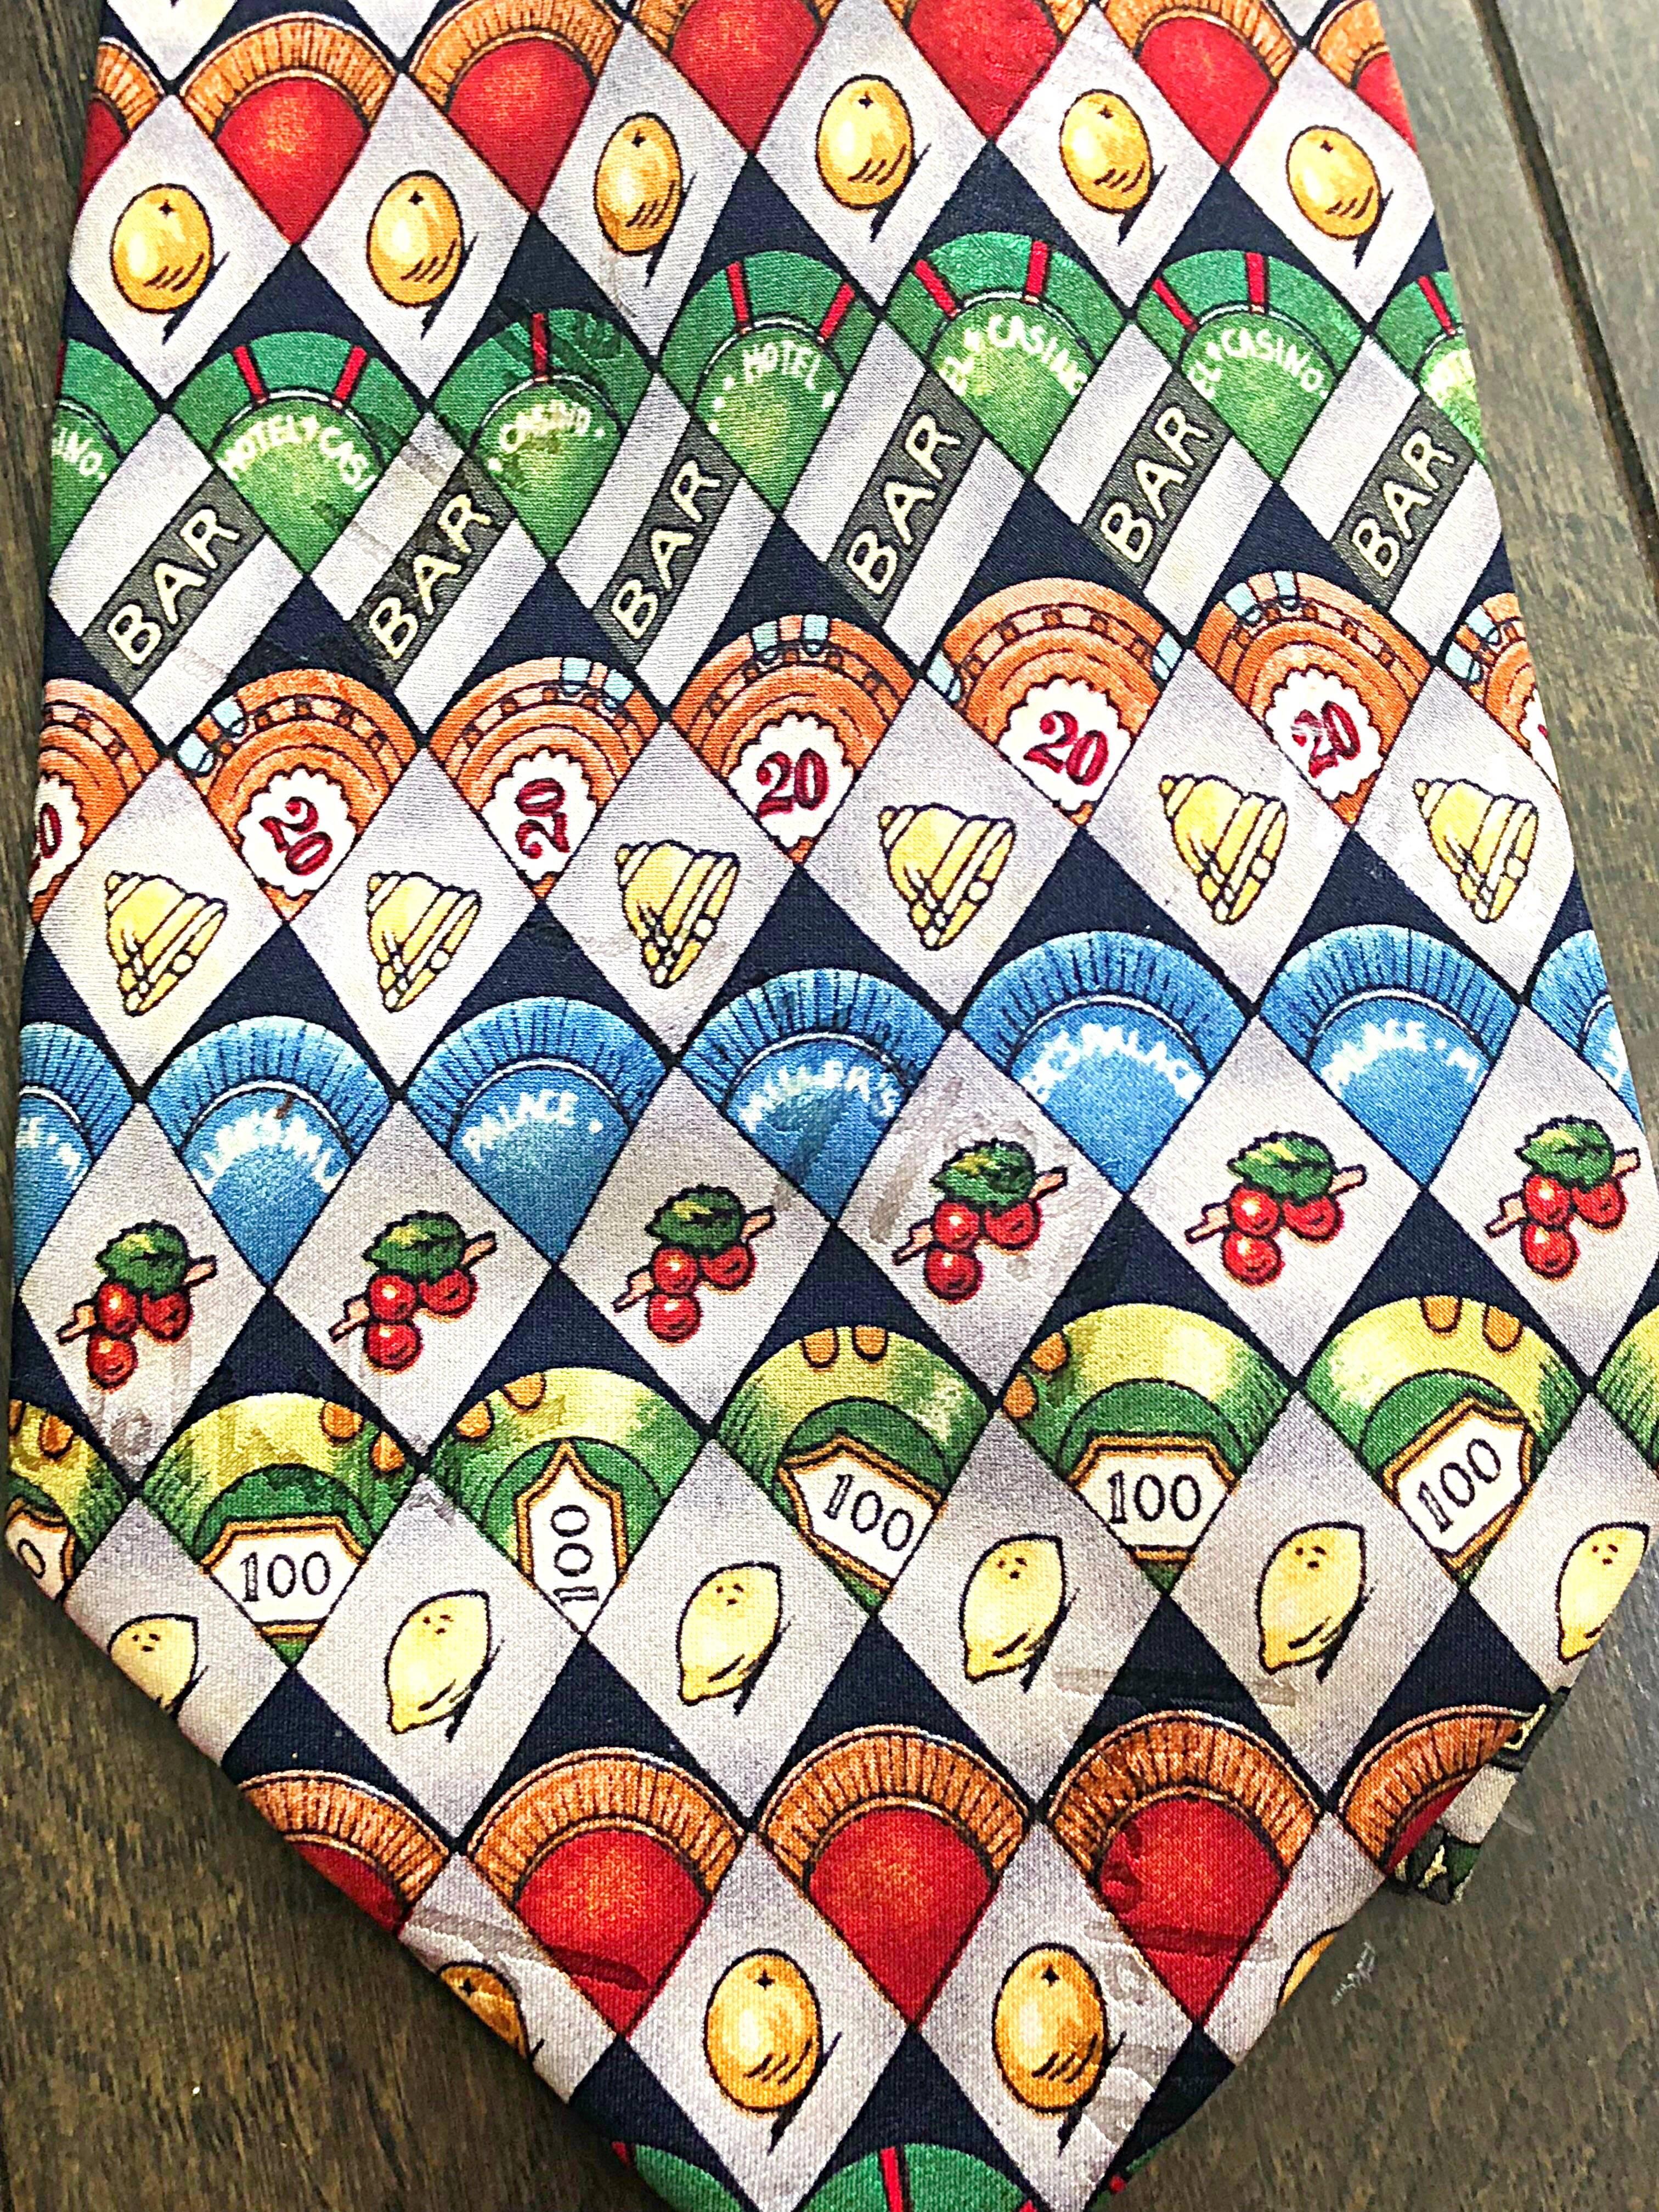 Limited edition never worn men's 1990s NICOLE MILLER 'slot machine' novelty print silk necktie! Features vibrant colored slot machine prints throughout. Perfect for a gift! In great unworn condition.